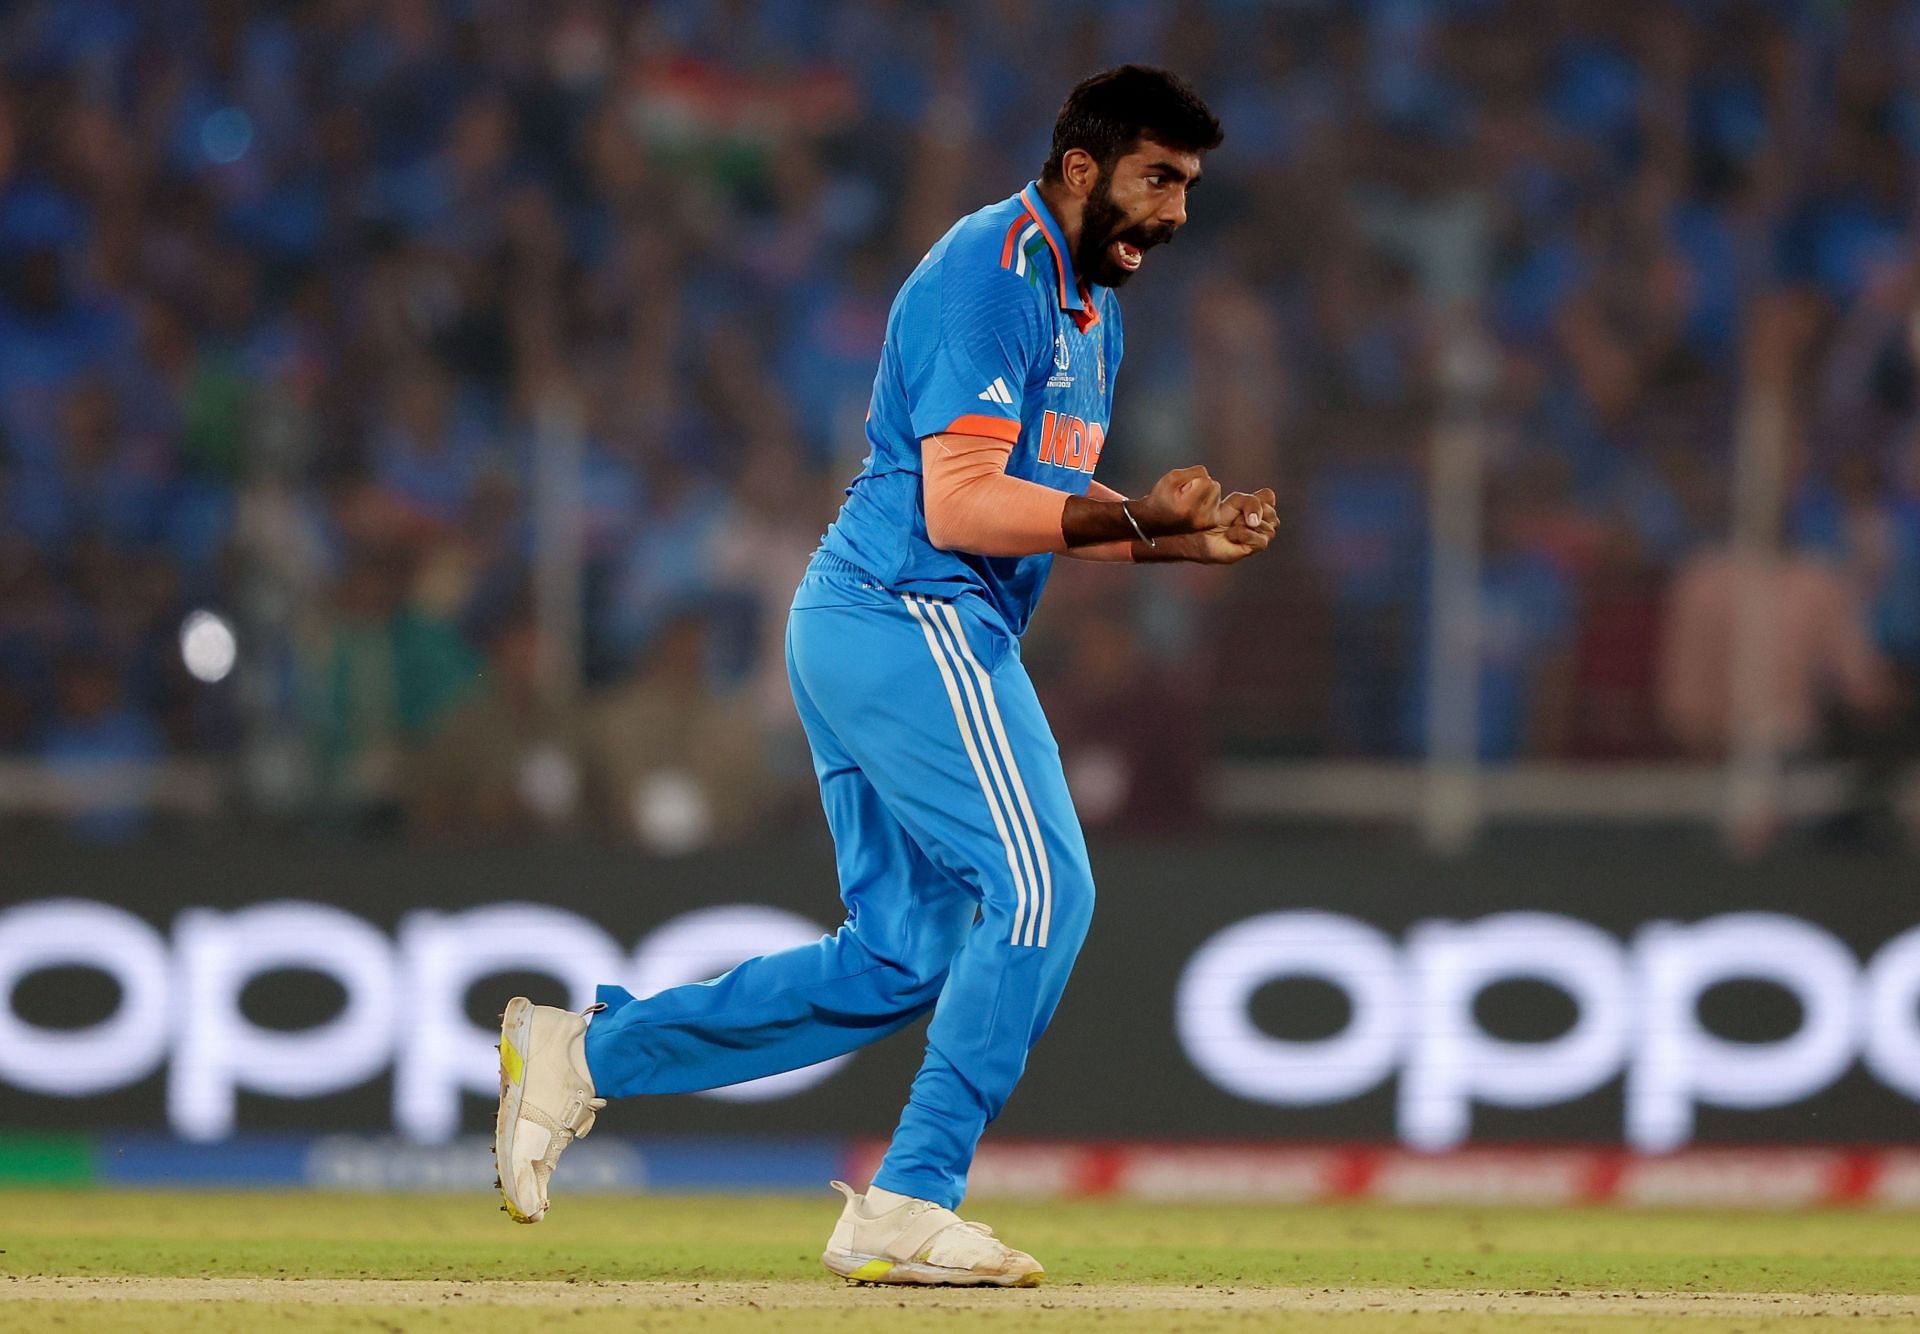 Jasprit Bumrah missed the 2022 T20 World Cup due to back issues. [P/C: Getty]